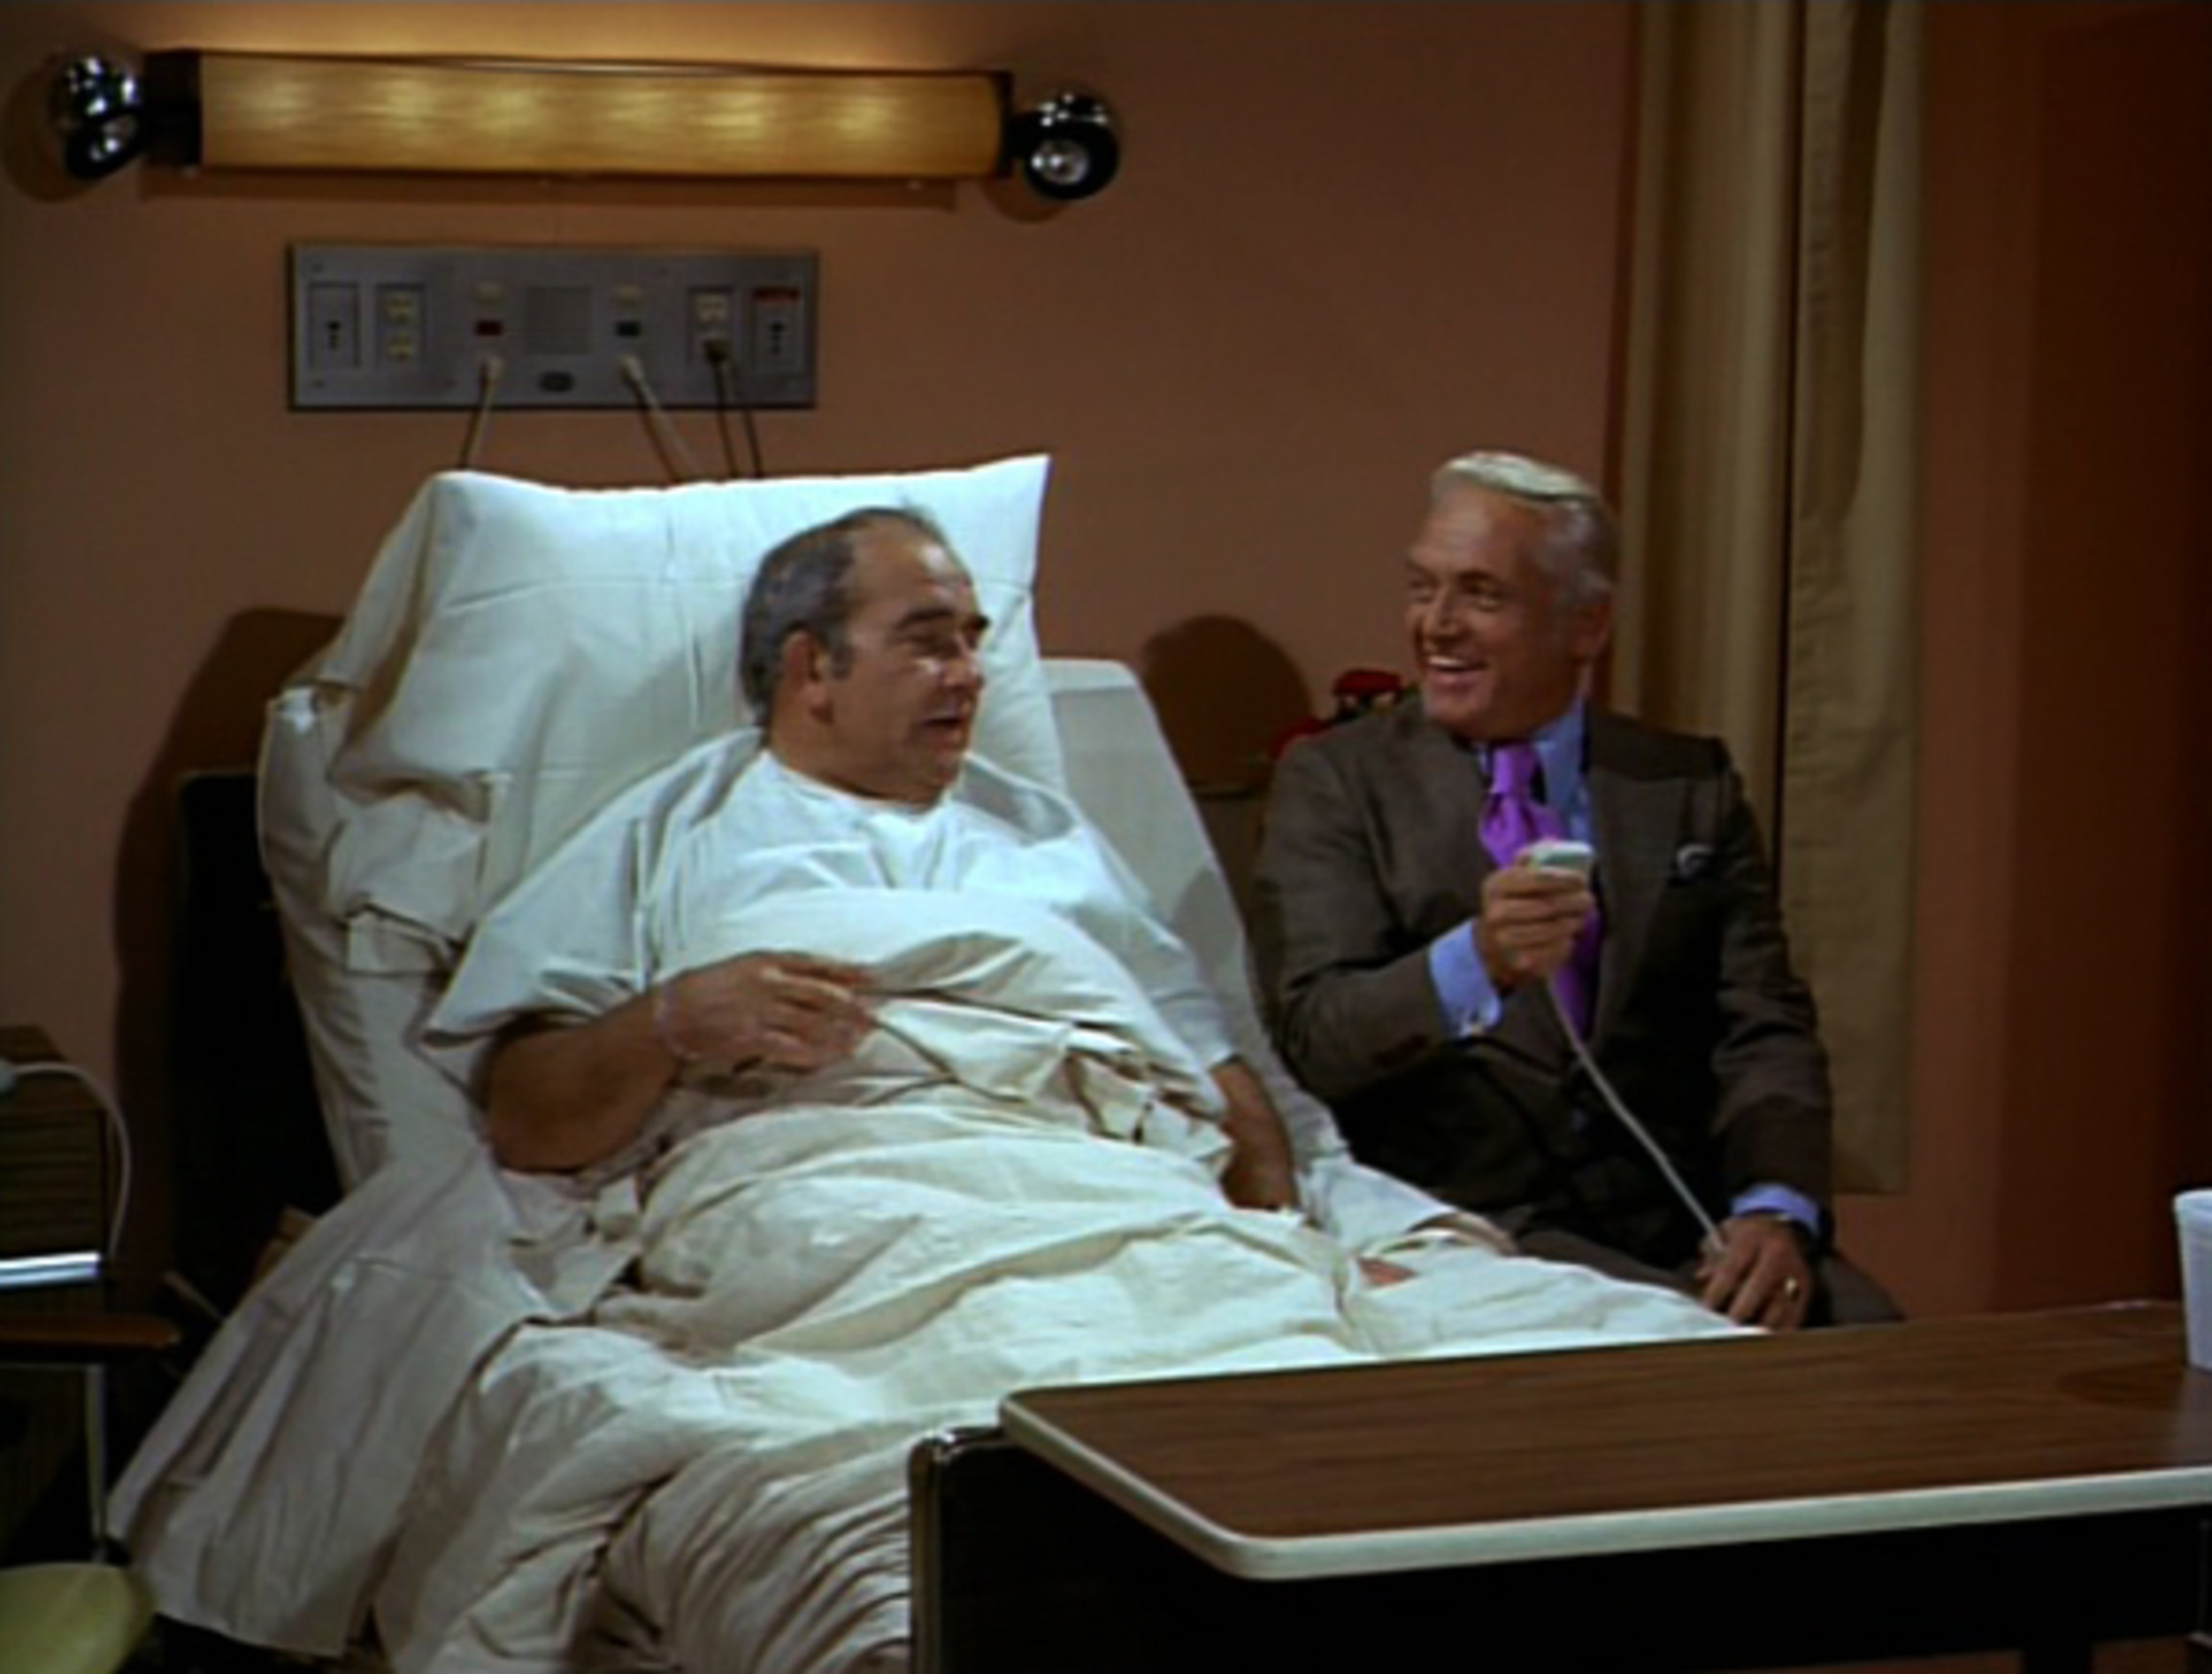 <p>Any storyline involving Lou and Ted tends to be all about Ted annoying Lou until he’s at the end of his rope. Now imagine Lou being stuck in the hospital with Ted visiting, unable to leave. It could become a bit too much of the same comedy beat, but in this episode, it really works well and allows Ted a smidge of redemption.</p><p>You may also like: <a href='https://www.yardbarker.com/entertainment/articles/laugh_tracks_18_of_the_funniest_songs_in_rock_history_090723/s1__38889806'>Laugh tracks: 18 of the funniest songs in rock history</a></p>